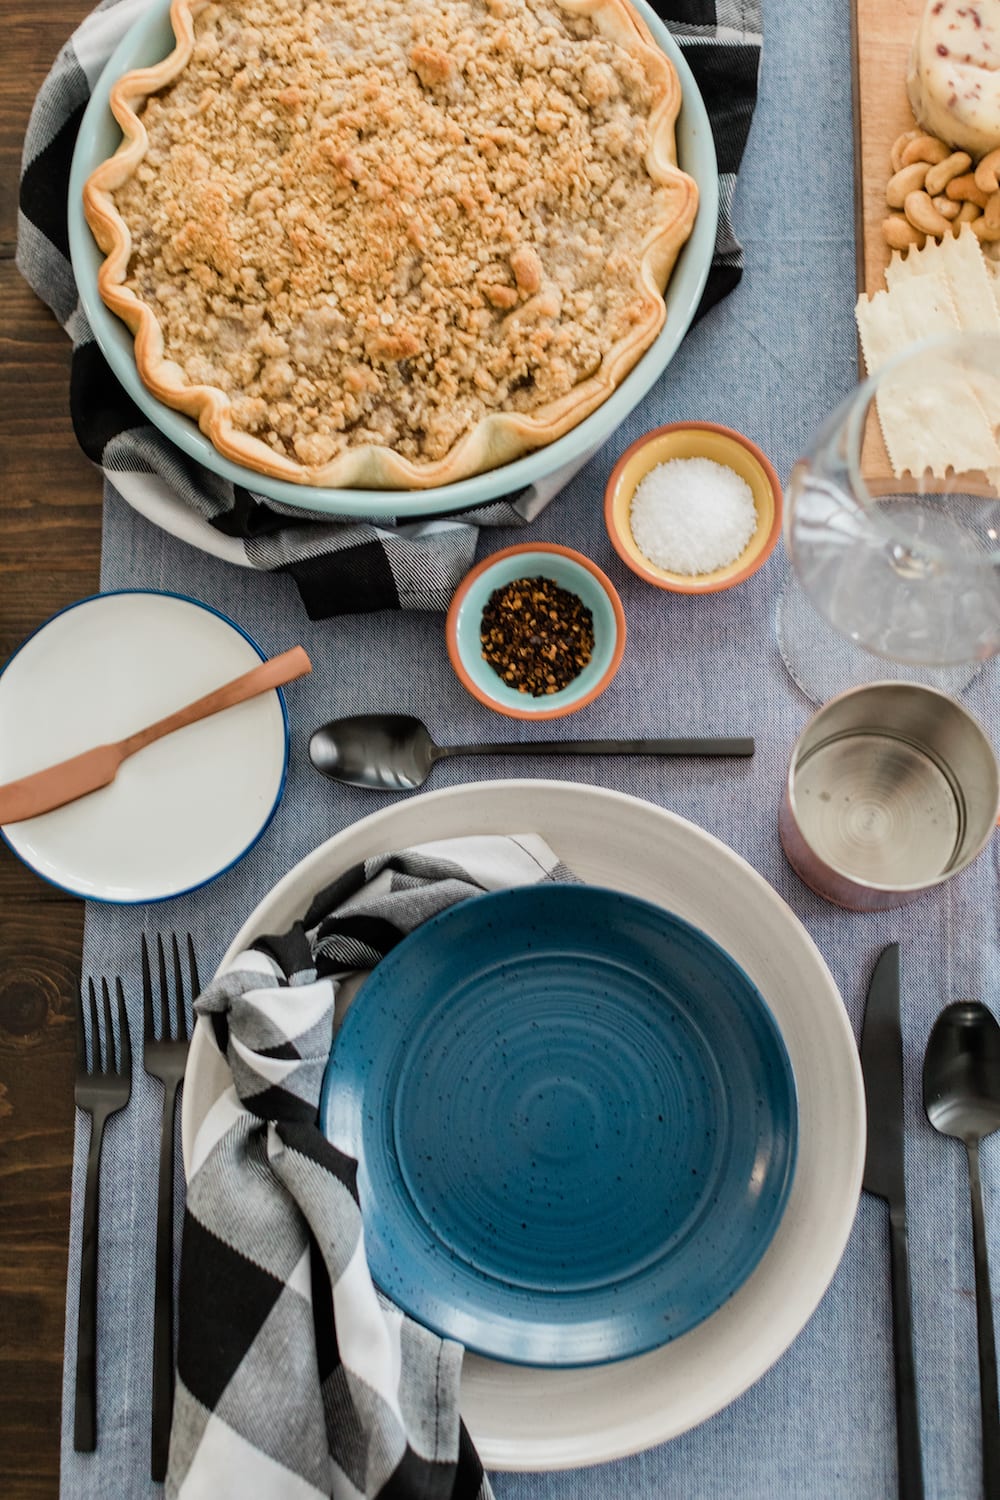 Thanksgiving Table Ideas | Entertaining with @cydconverse